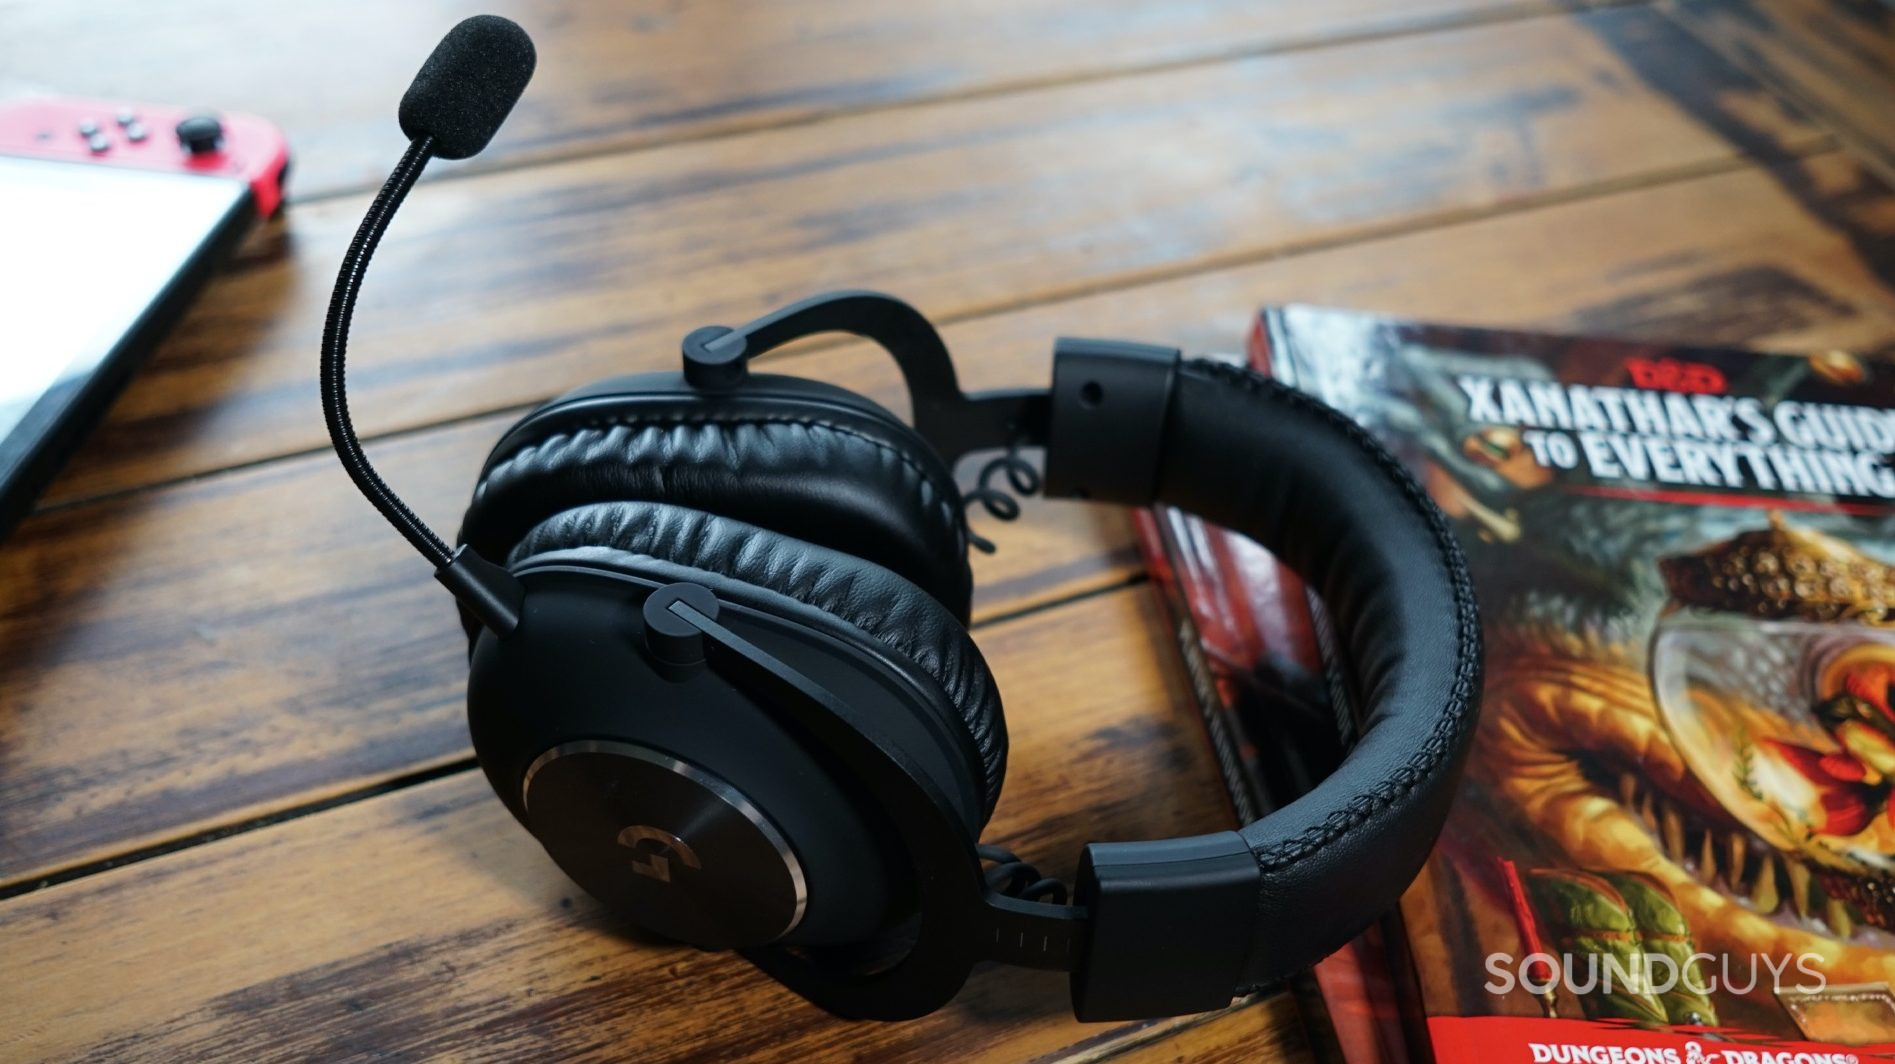 The Logitech G Pro X gaming headset lays on a wooden table leaning on a copy of Xanathar's Guide to Everything, with a Nintendo Switch in the background.